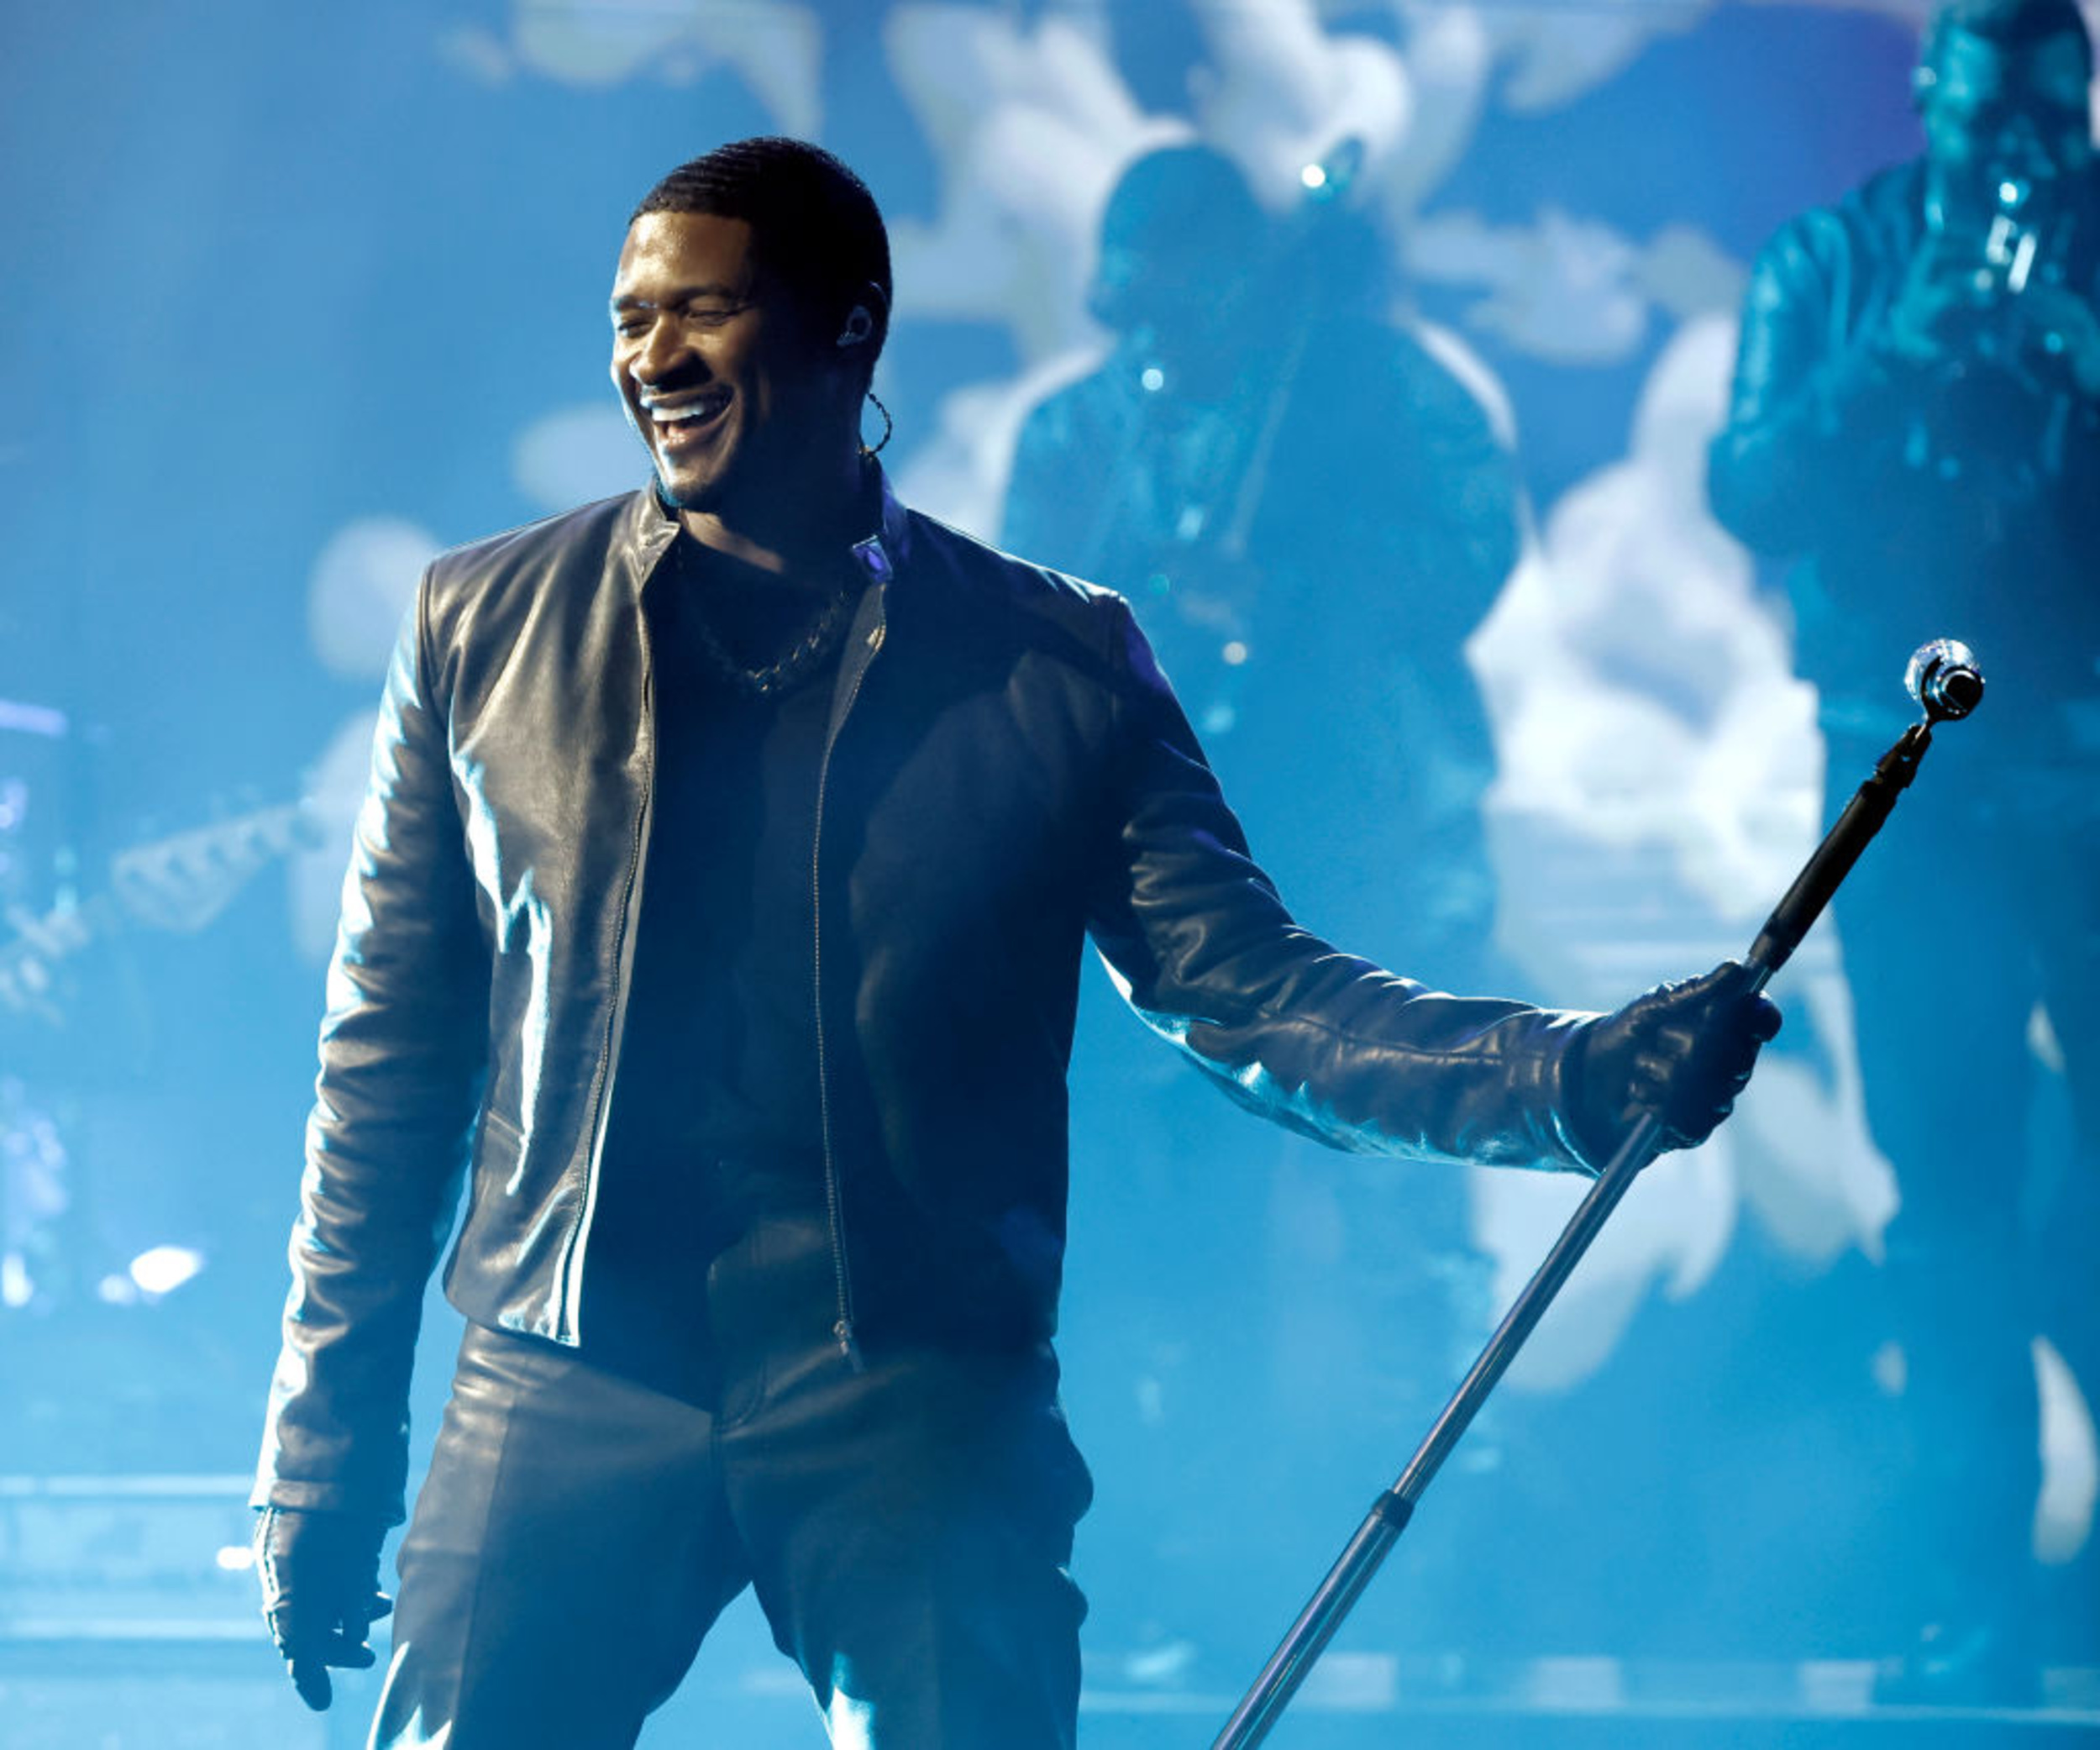 <p>Usher has been the talk all across social media thanks to his Las Vegas residency. One of the most epic parts of the show is when he serenades a special fan in the audience with his 2010 single <a href="https://www.youtube.com/watch?v=m6urbZyHgO4" rel="noopener noreferrer">“There Goes My Baby.”</a> On the track, Usher details how much he admires his partner and how he can’t wait to be affectionate with her. As he sings on the hook, “There goes my baby / Oooh, girl, look at you / You don’t know how good it feels to call you my girl.” </p><p>You may also like: <a href='https://www.yardbarker.com/entertainment/articles/the_20_best_netflix_original_movies_111623/s1__39529969'>The 20 best Netflix original movies</a></p>